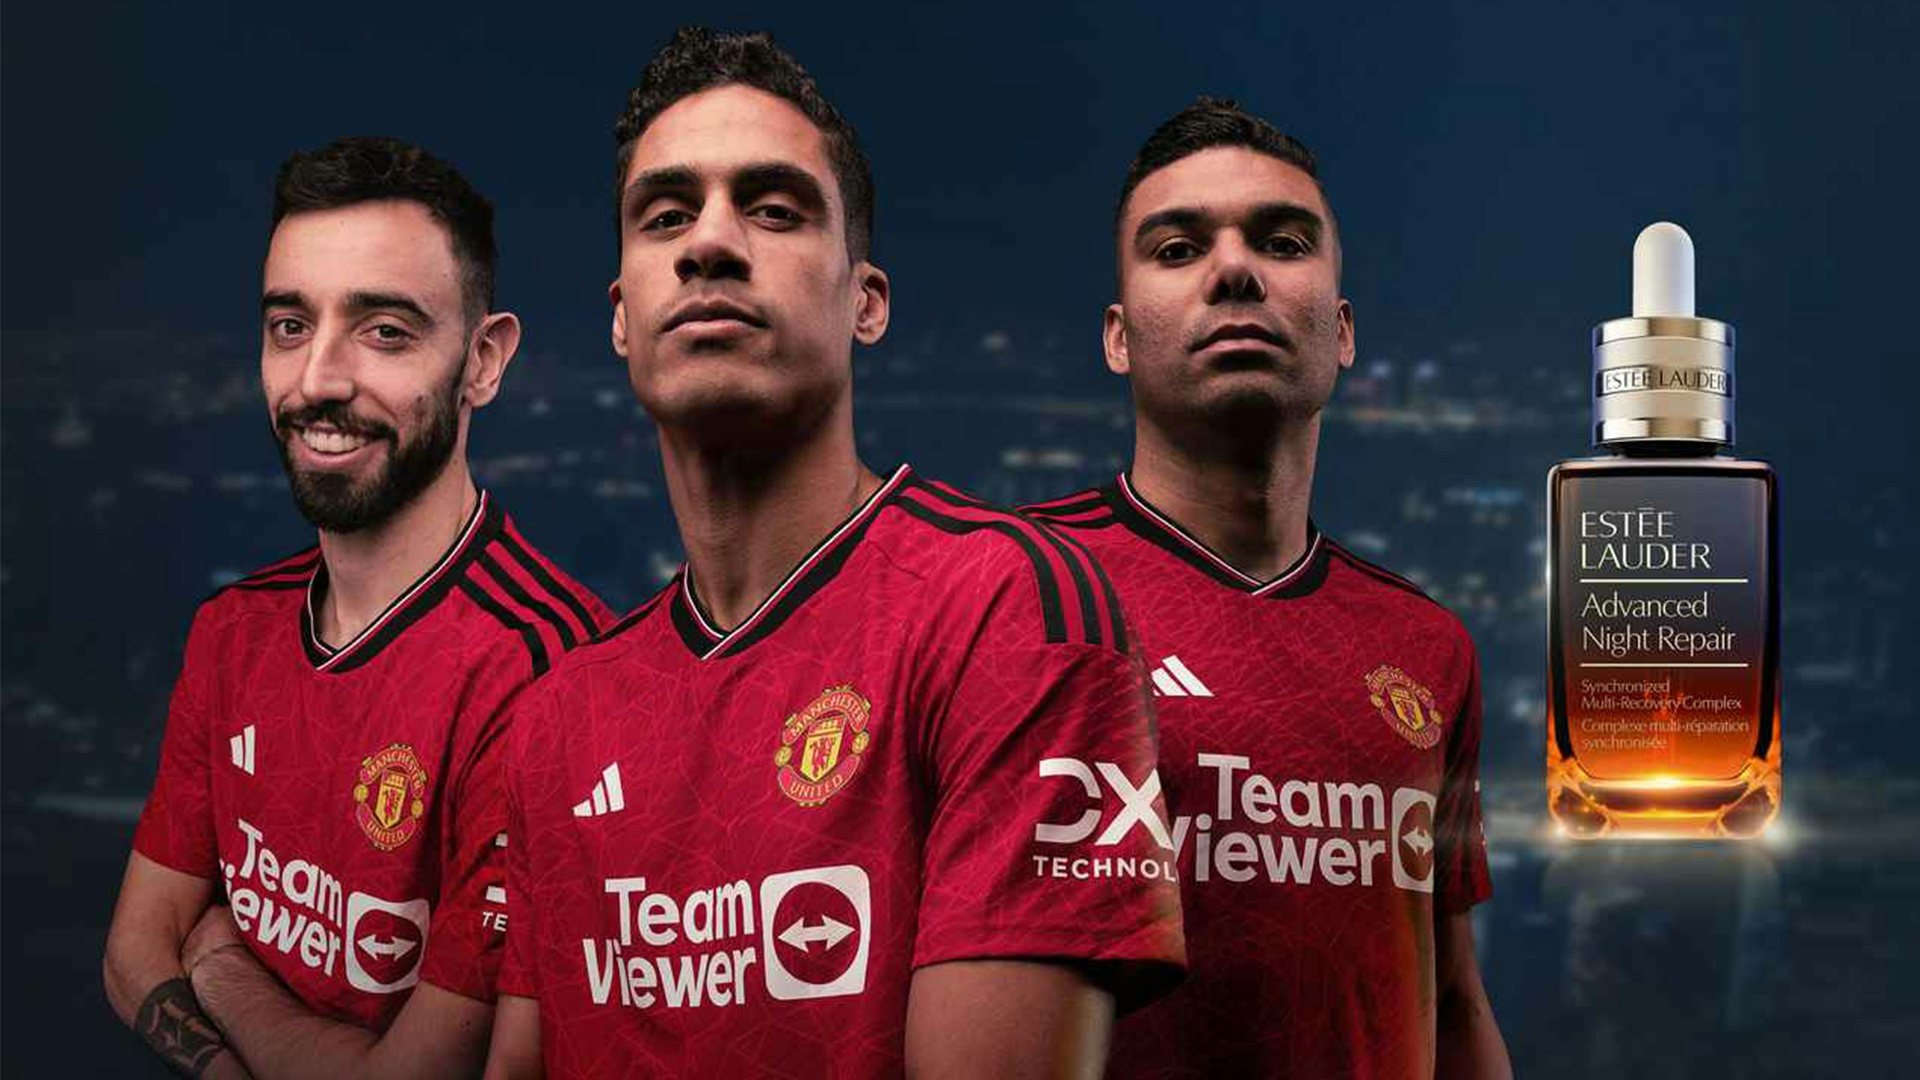 The beauty giant is hoping to score big with Manchester United’s huge Asian fanbase. Could this be a winning formula for selling male beauty products? Photo: Manchester United